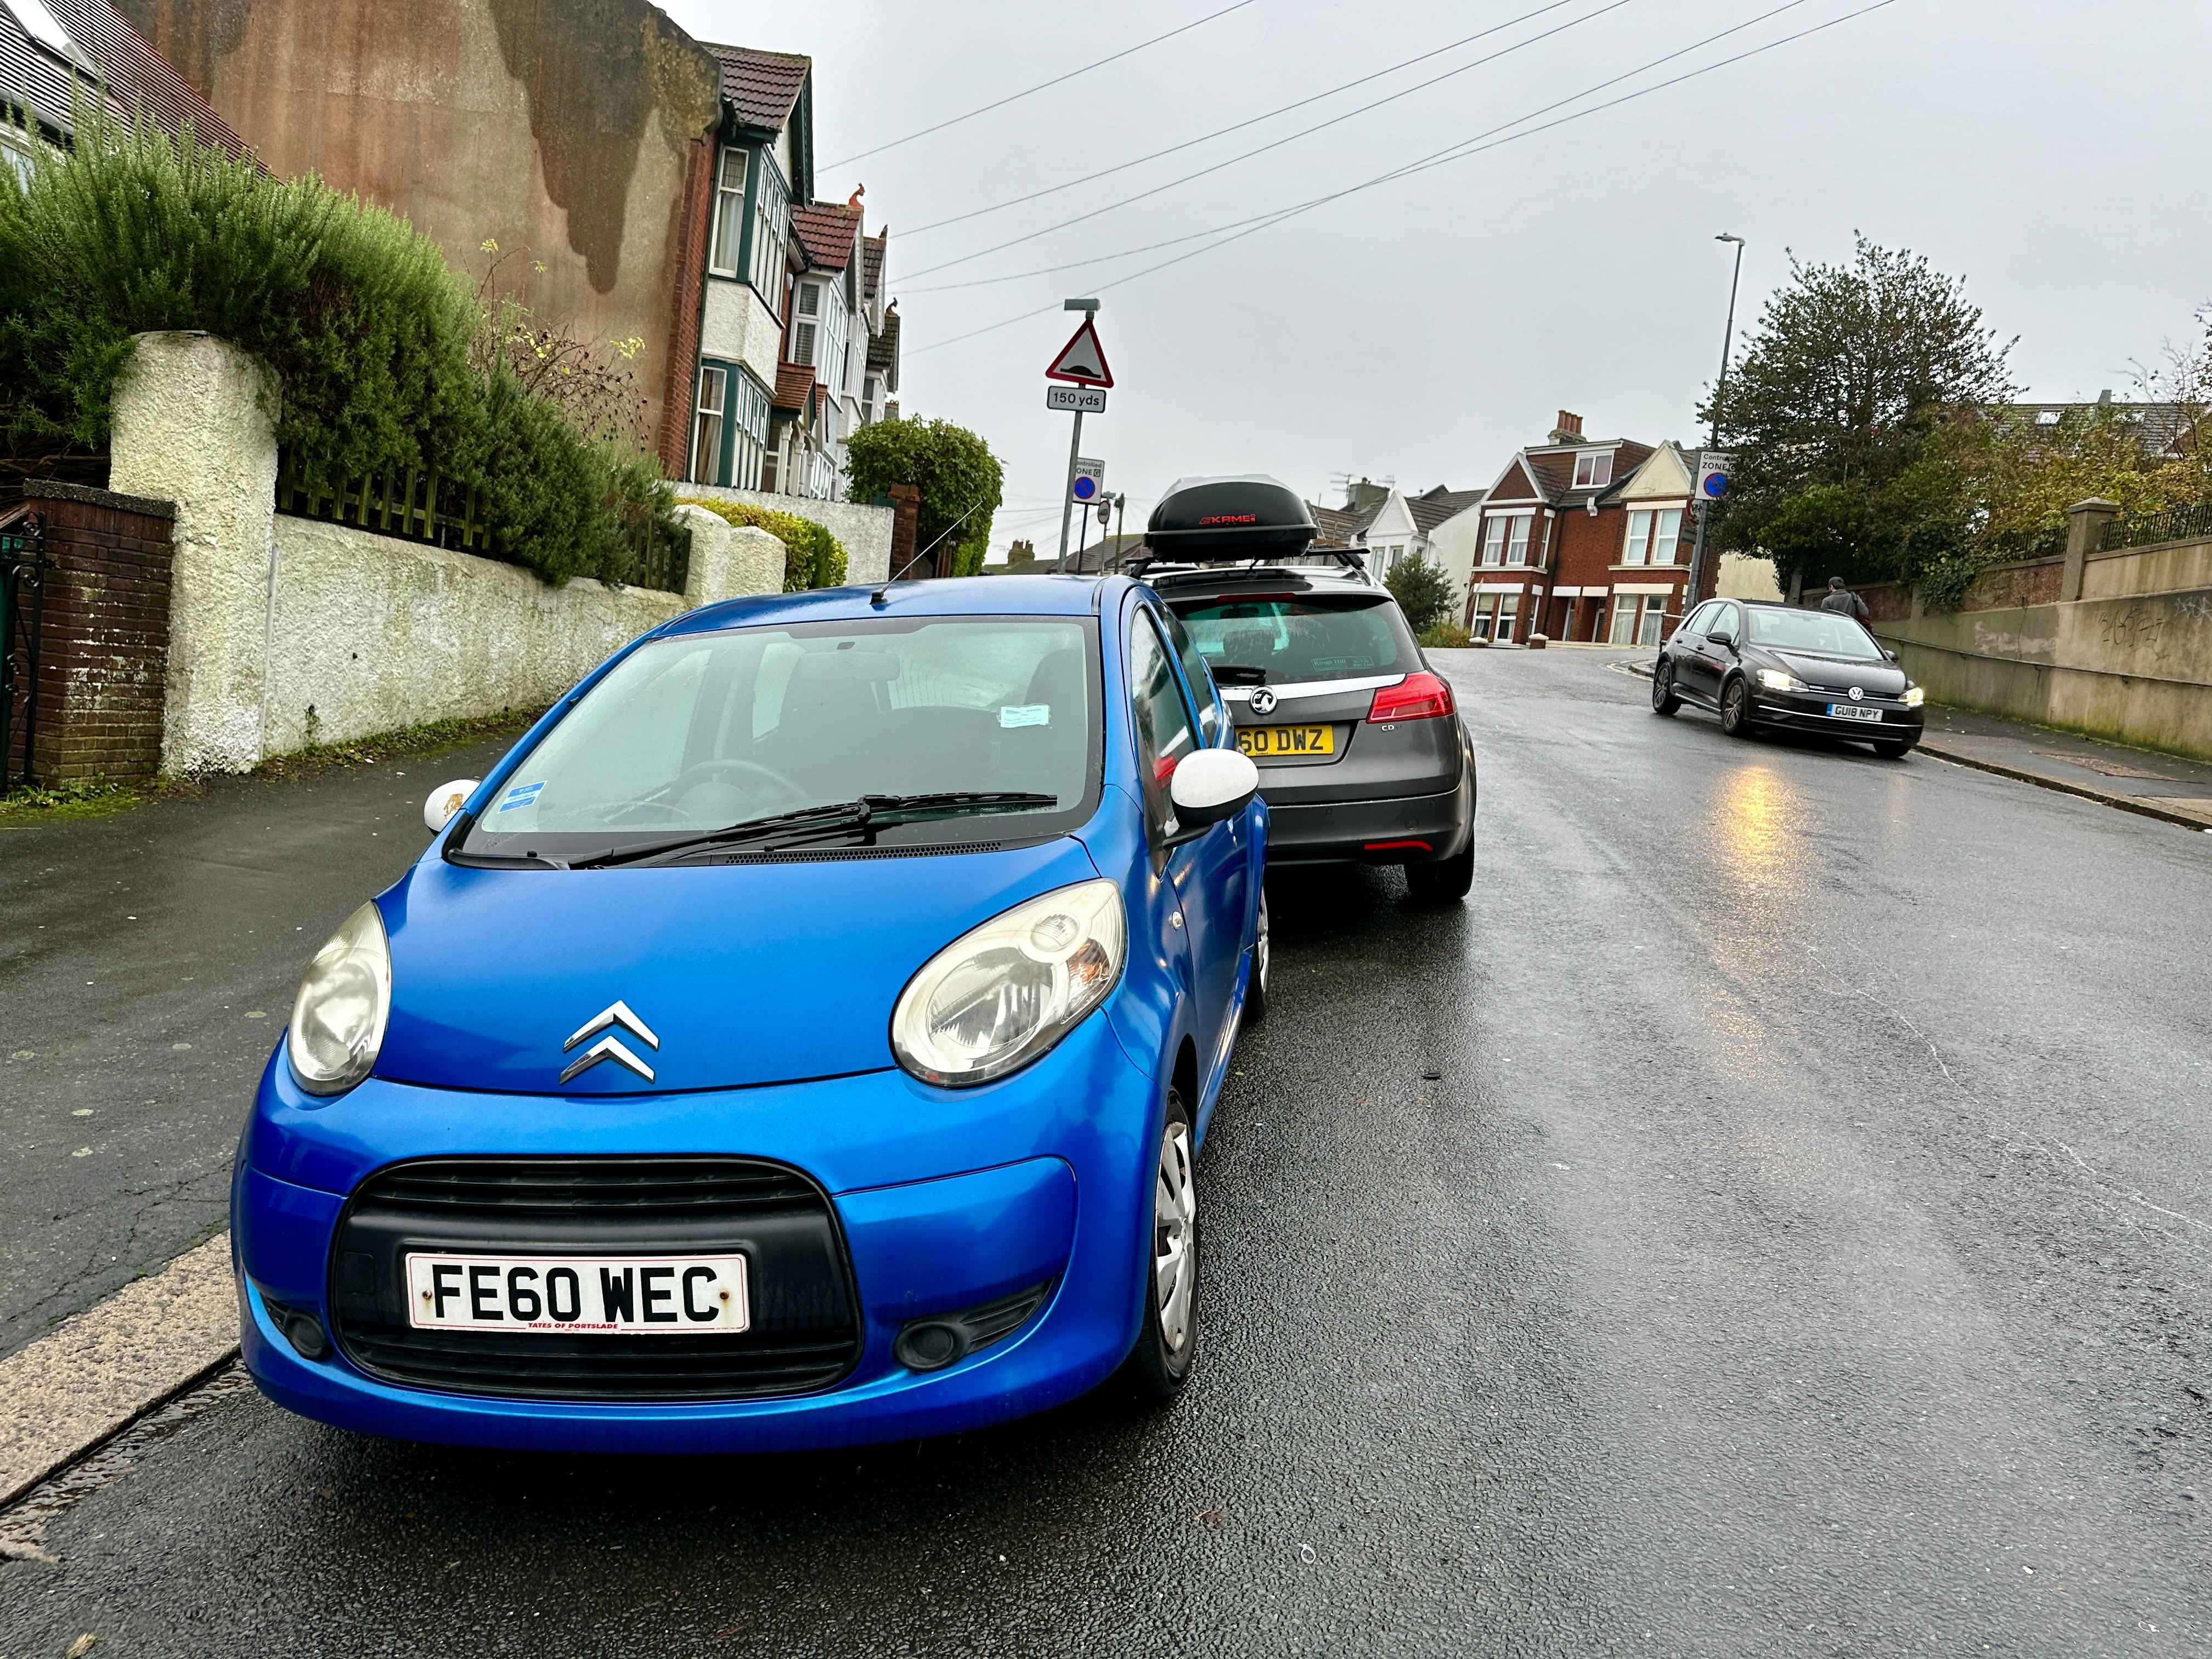 Photograph of FE60 WEC - a Blue Citroen C1 parked in Hollingdean by a non-resident. The seventh of ten photographs supplied by the residents of Hollingdean.